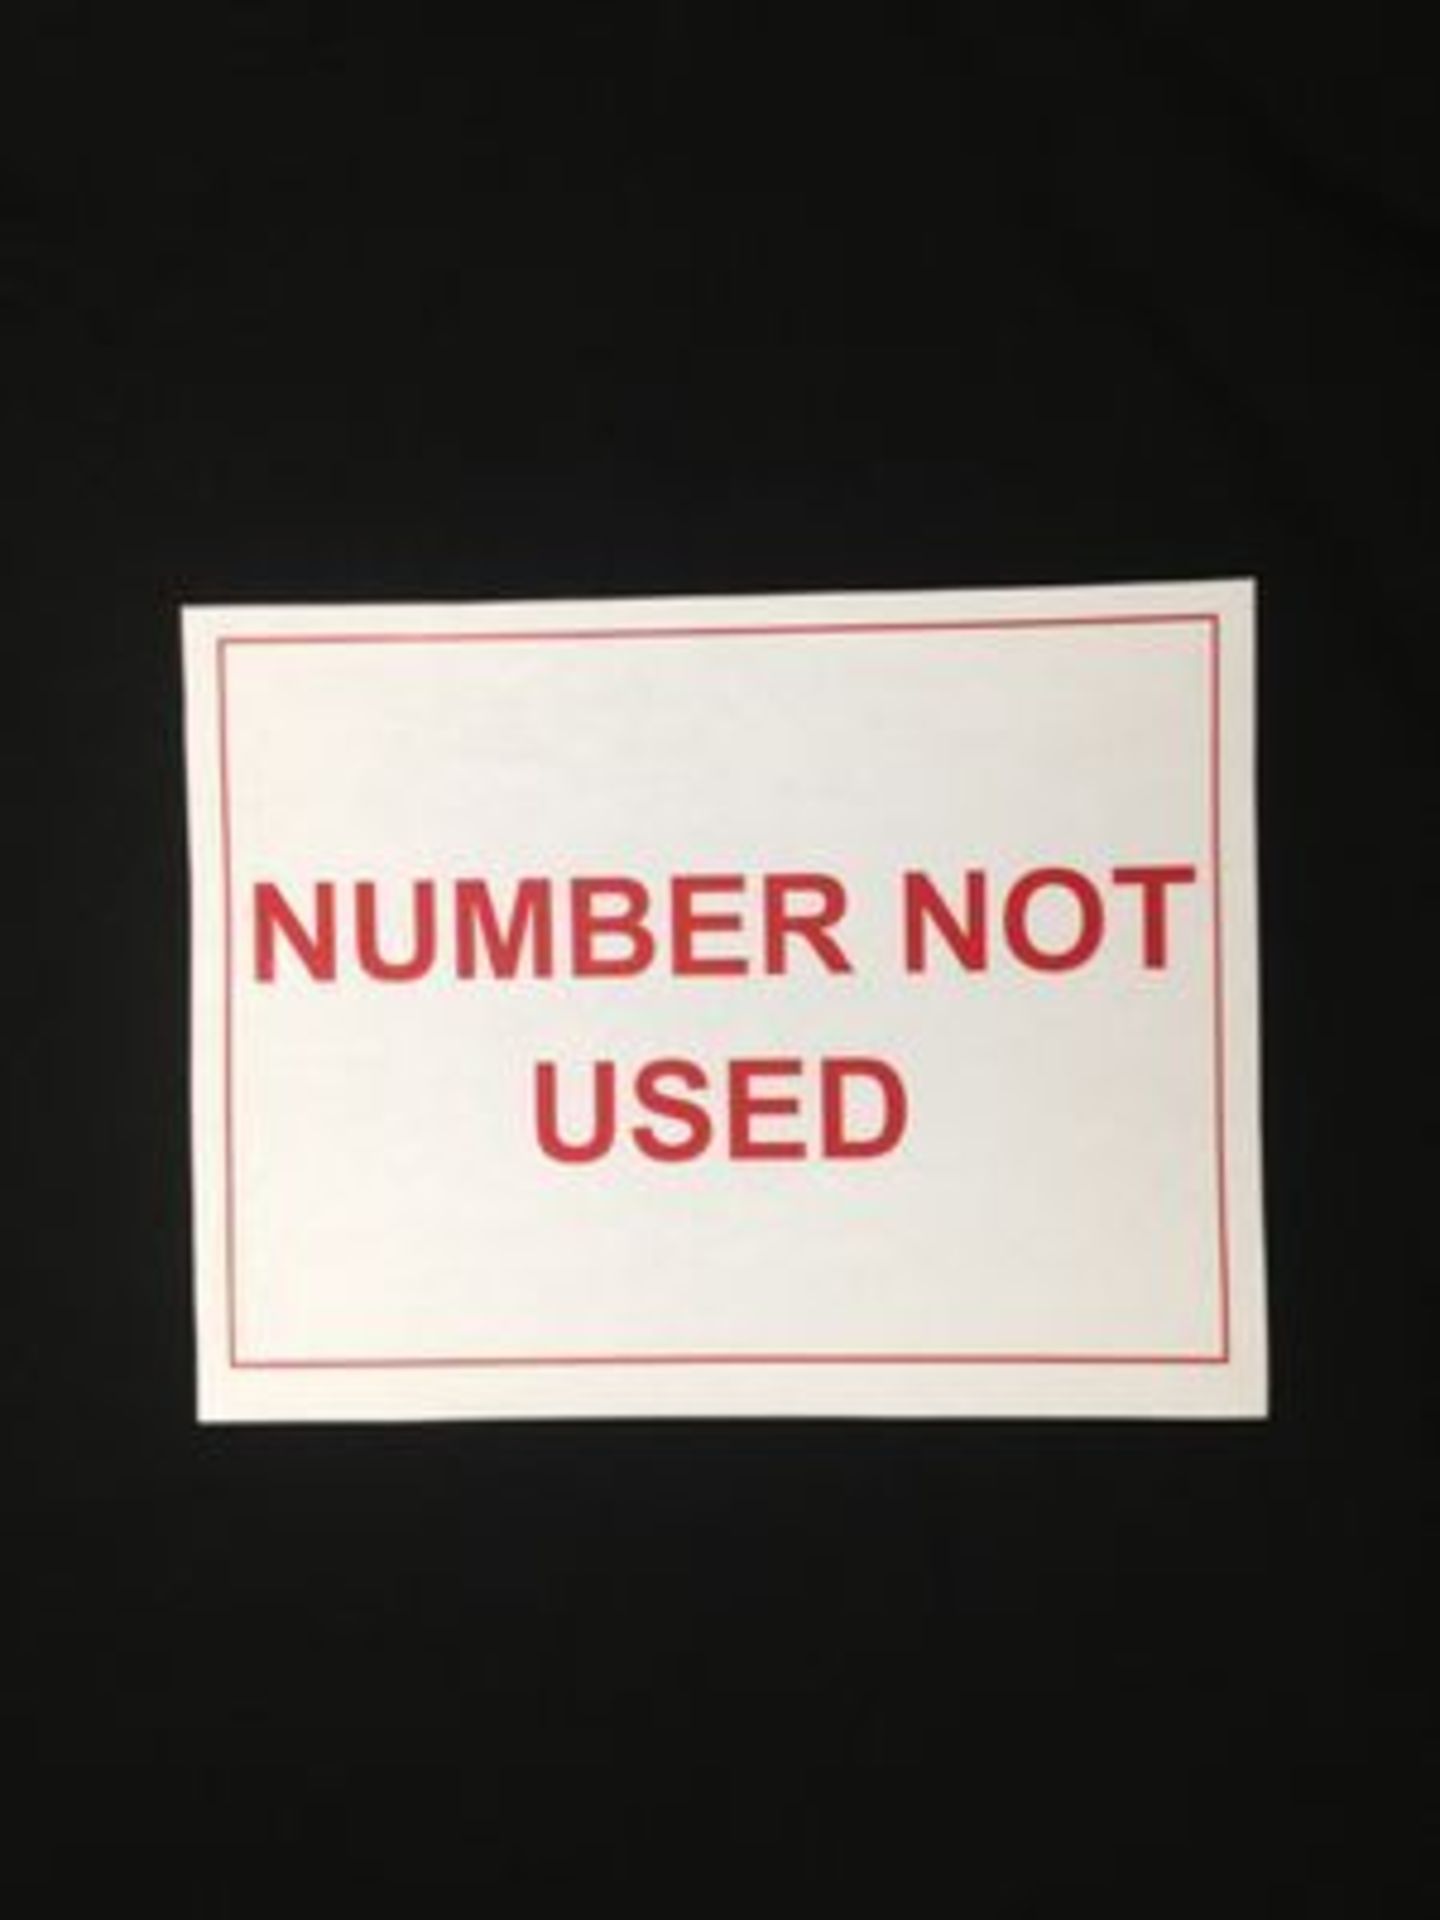 NUMBER NOT USED